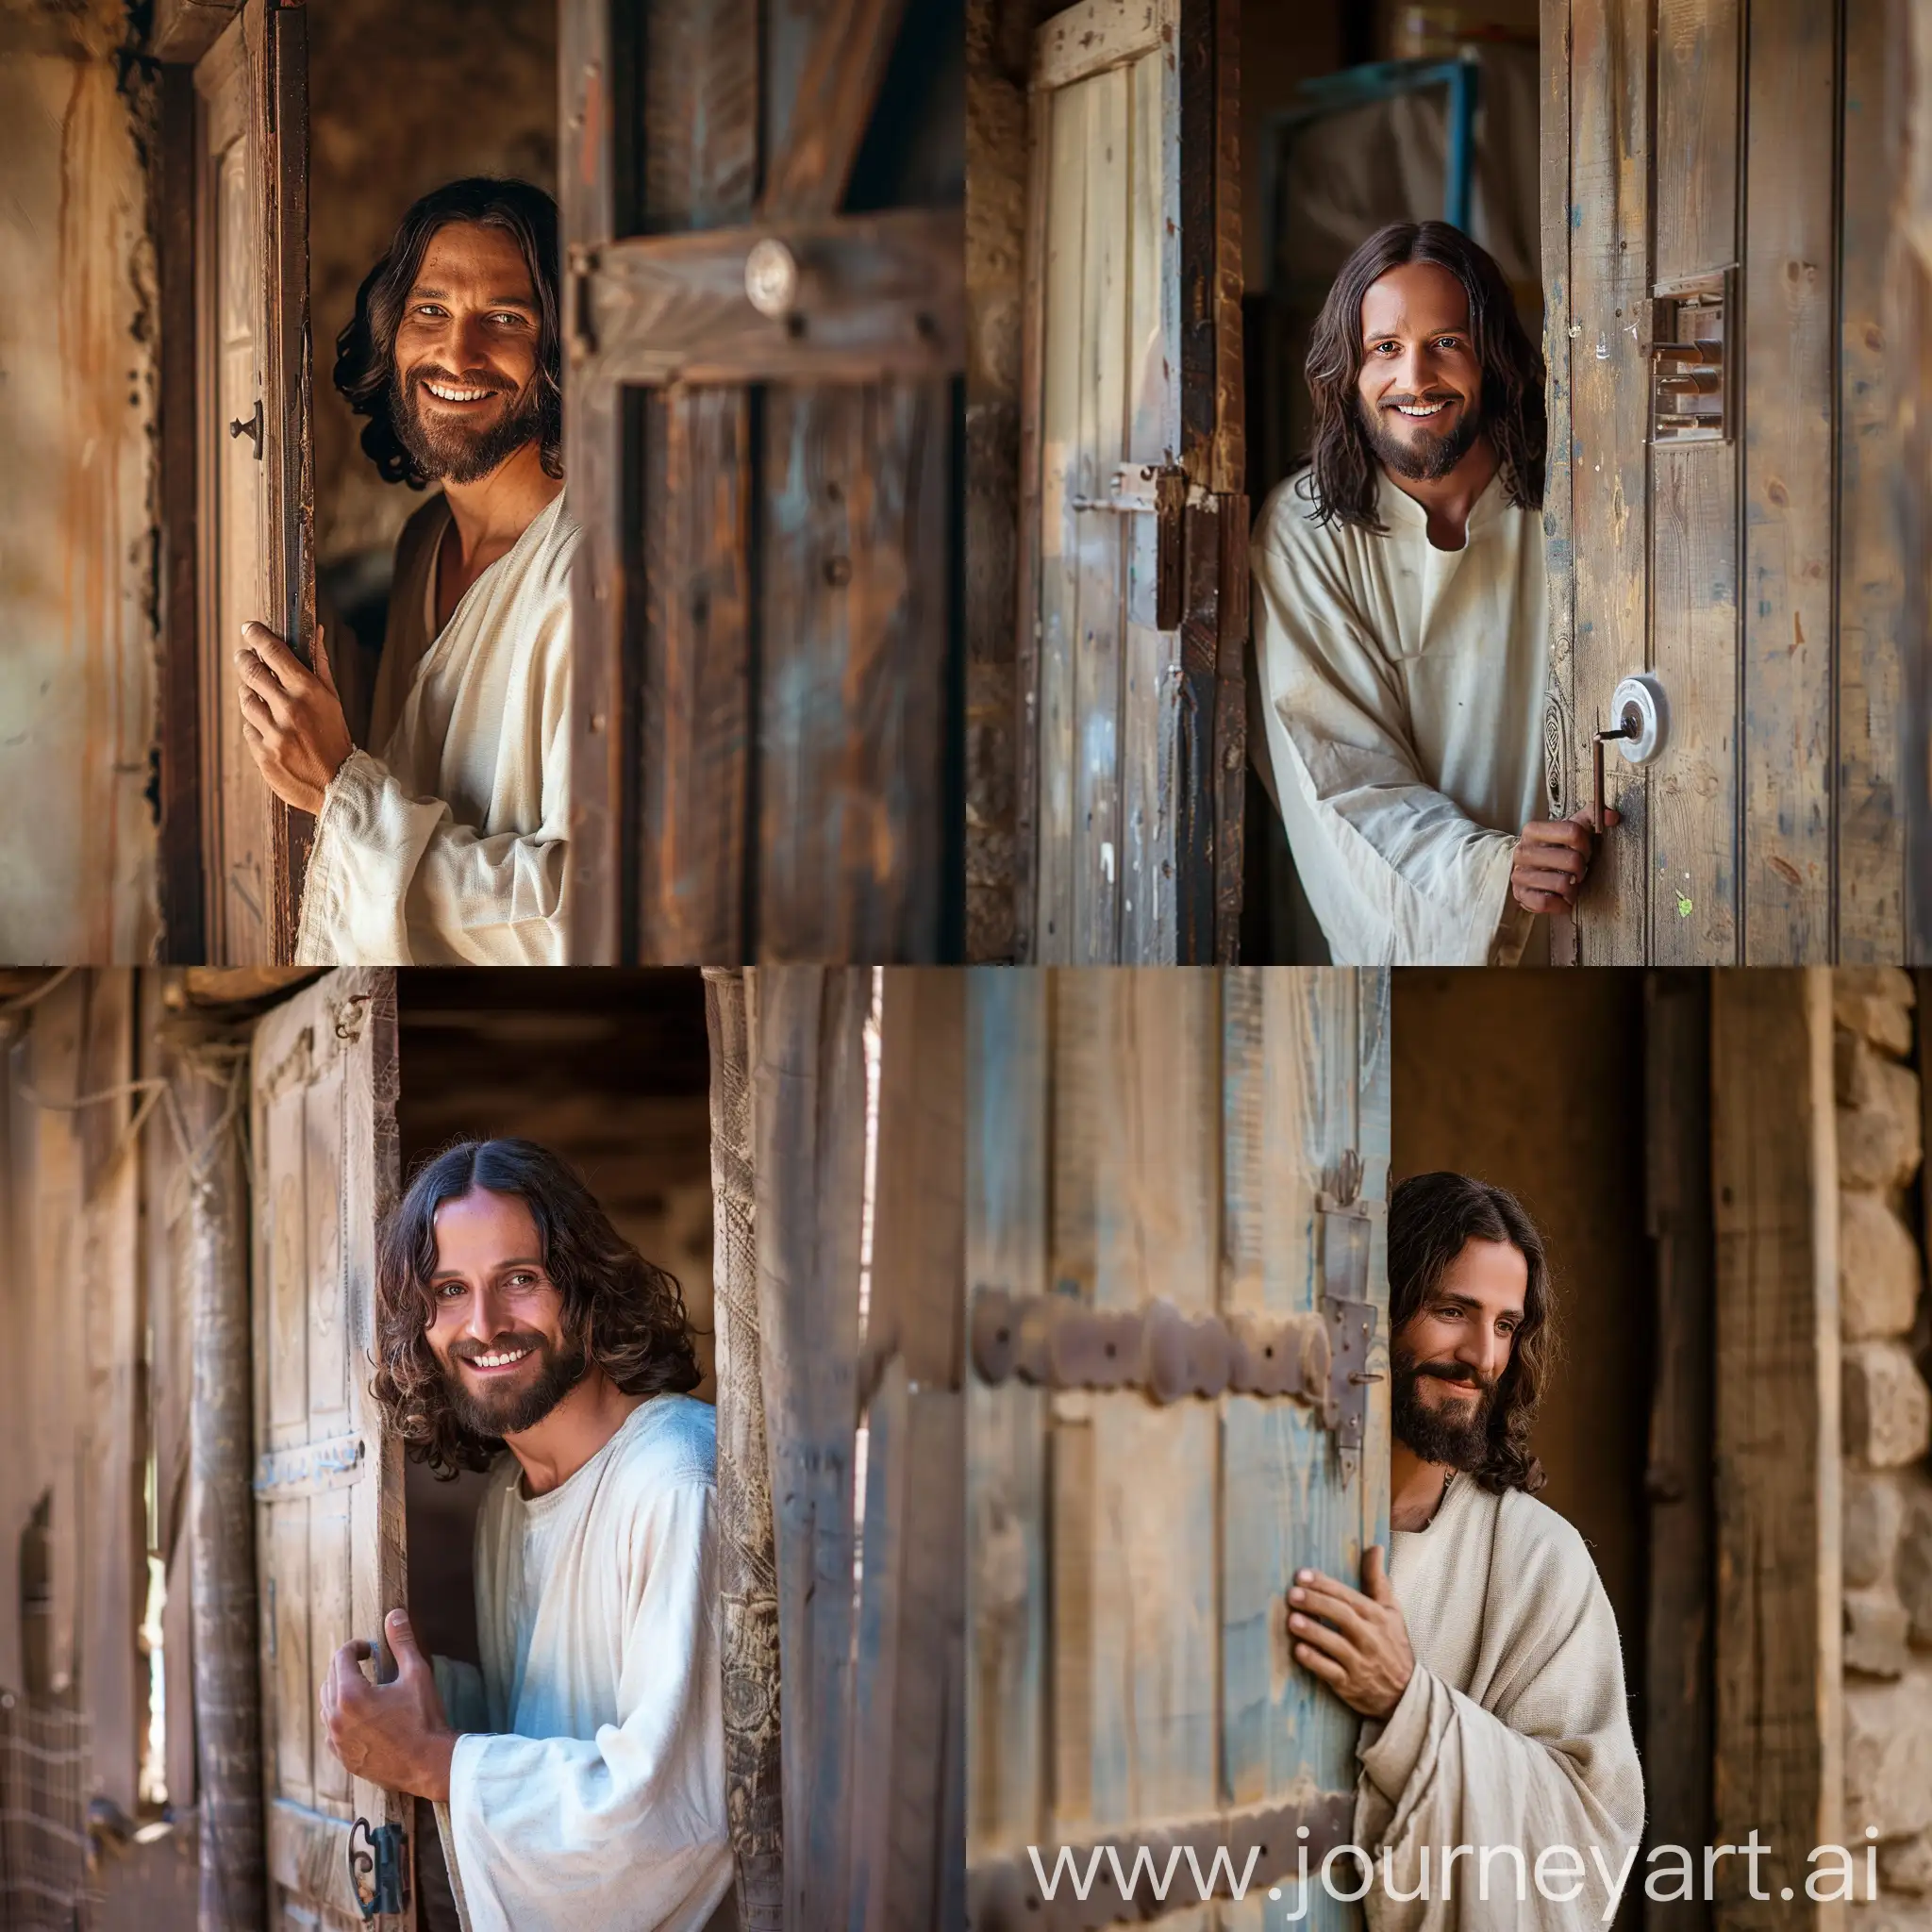 Jesus-Christ-Welcoming-Guests-in-a-Palestinian-Home